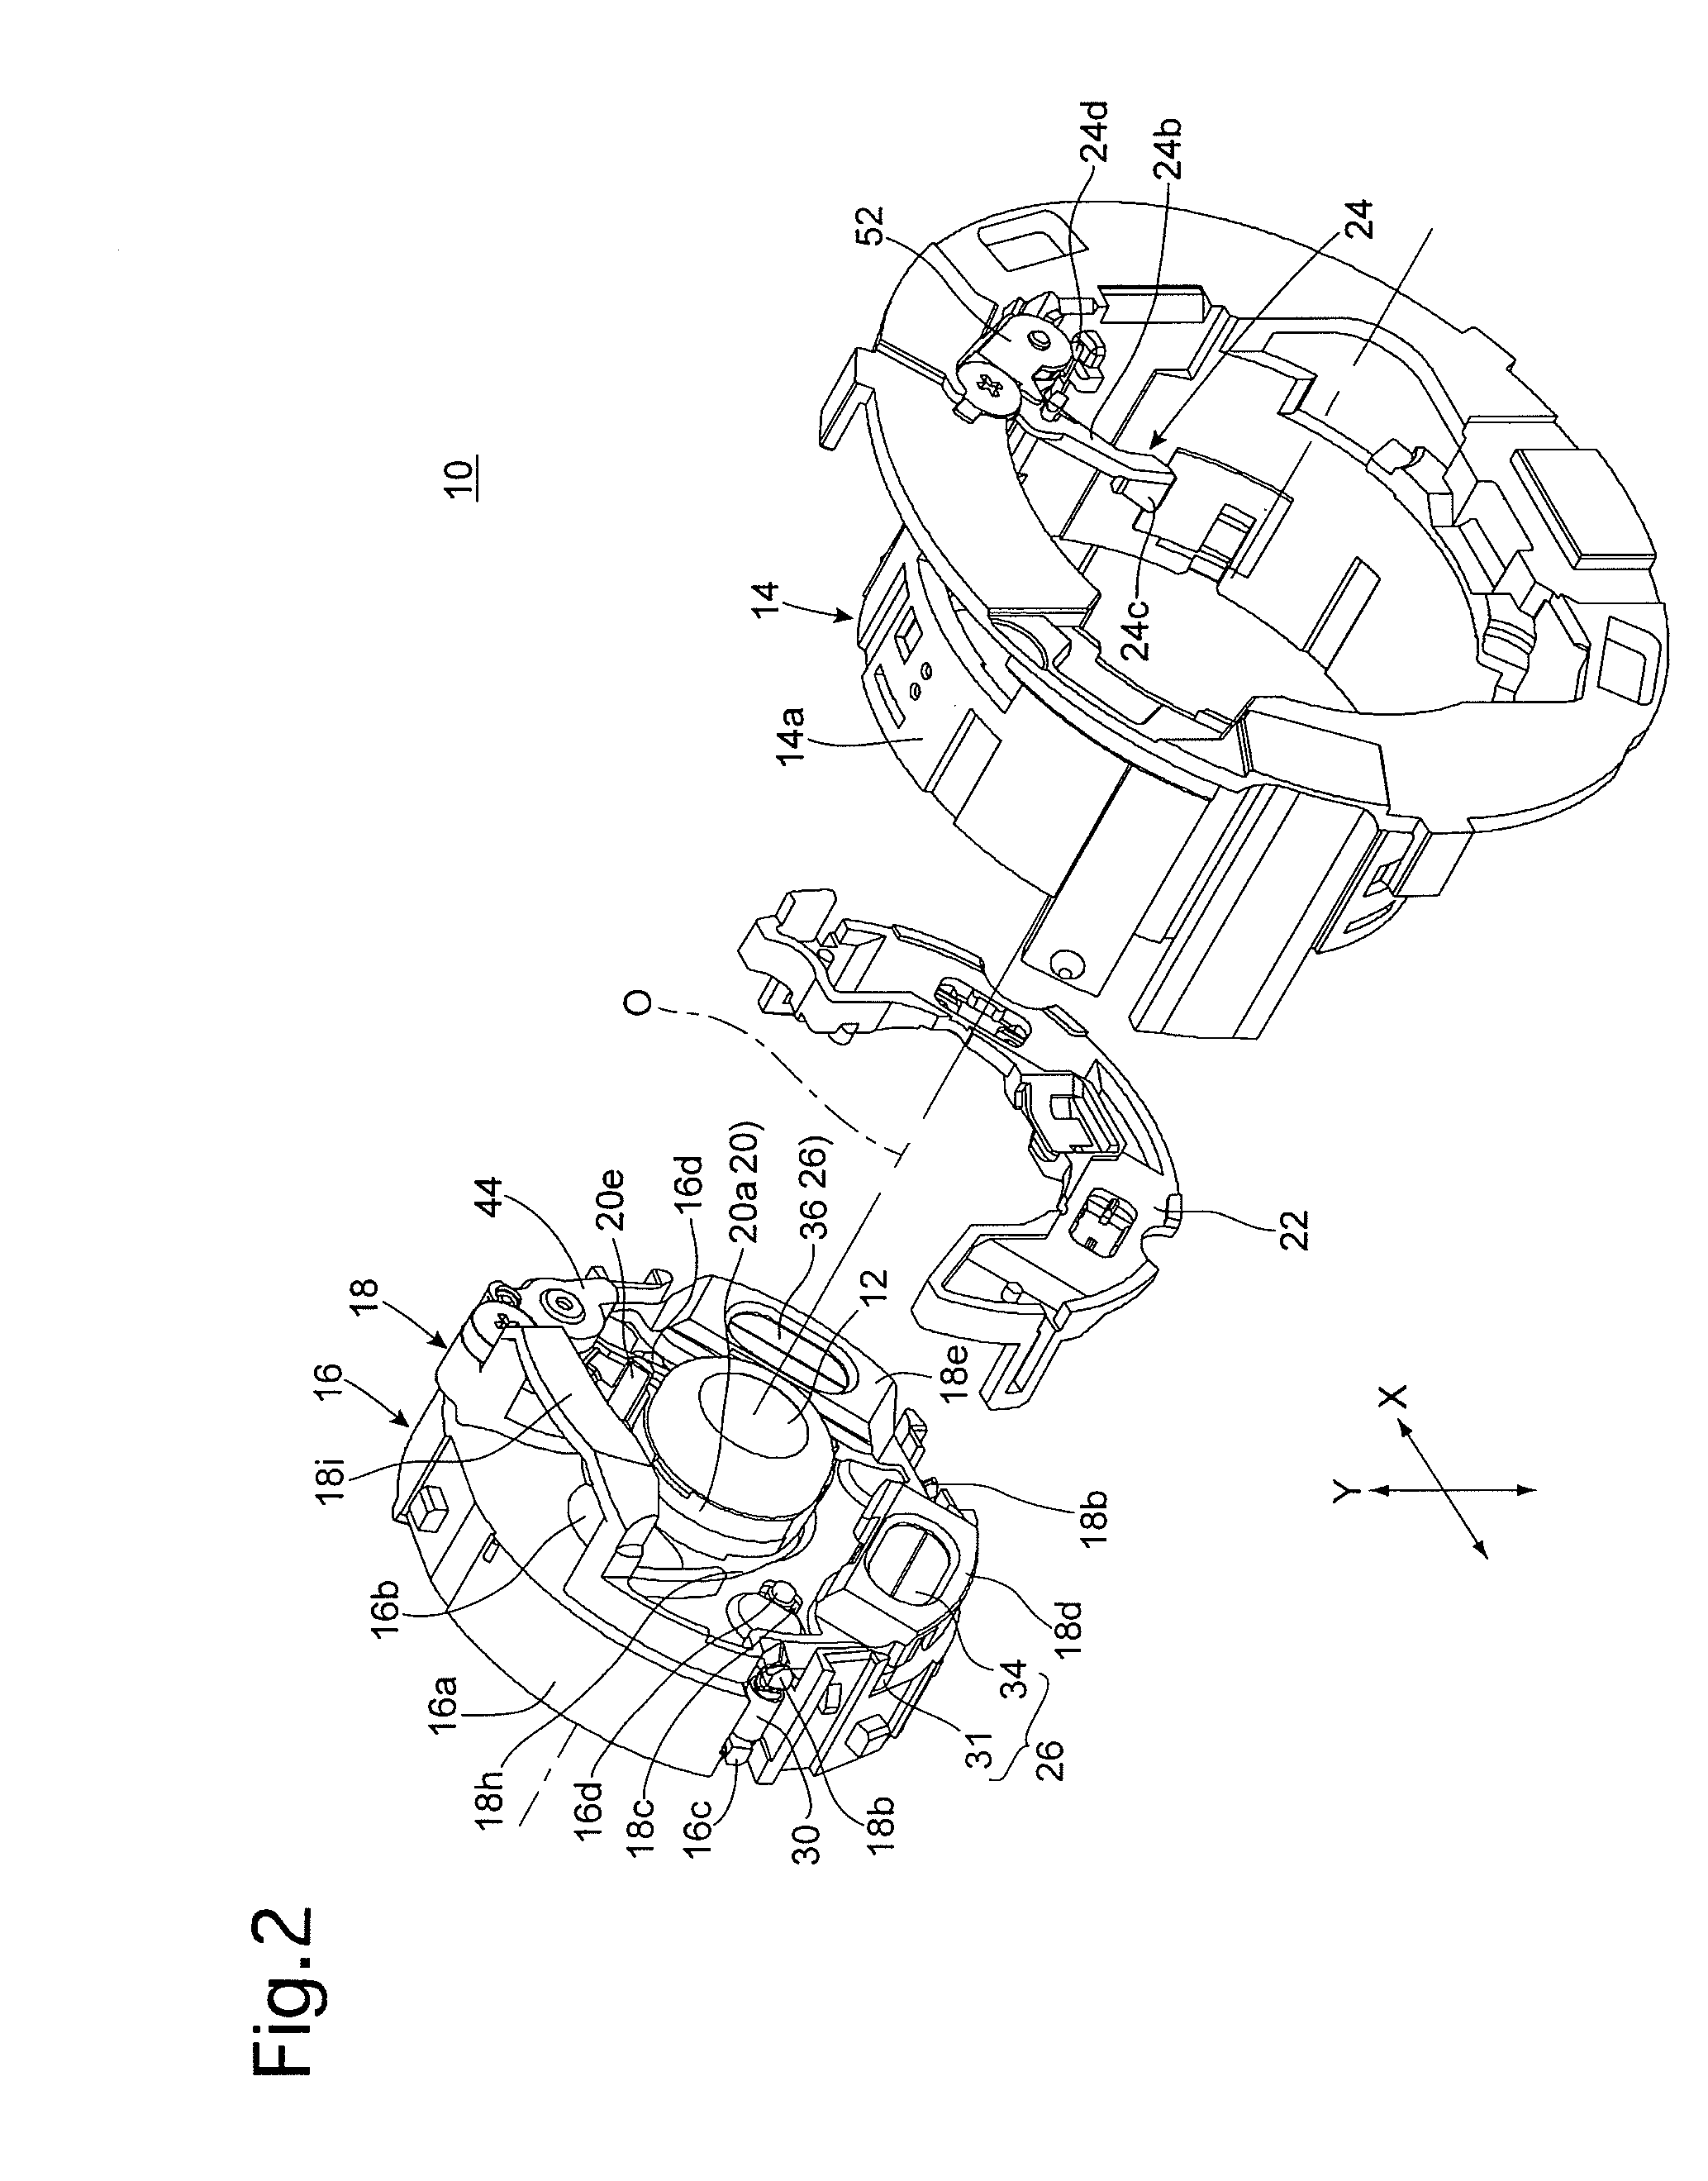 Position controller for image-stabilizing insertable/removable optical element